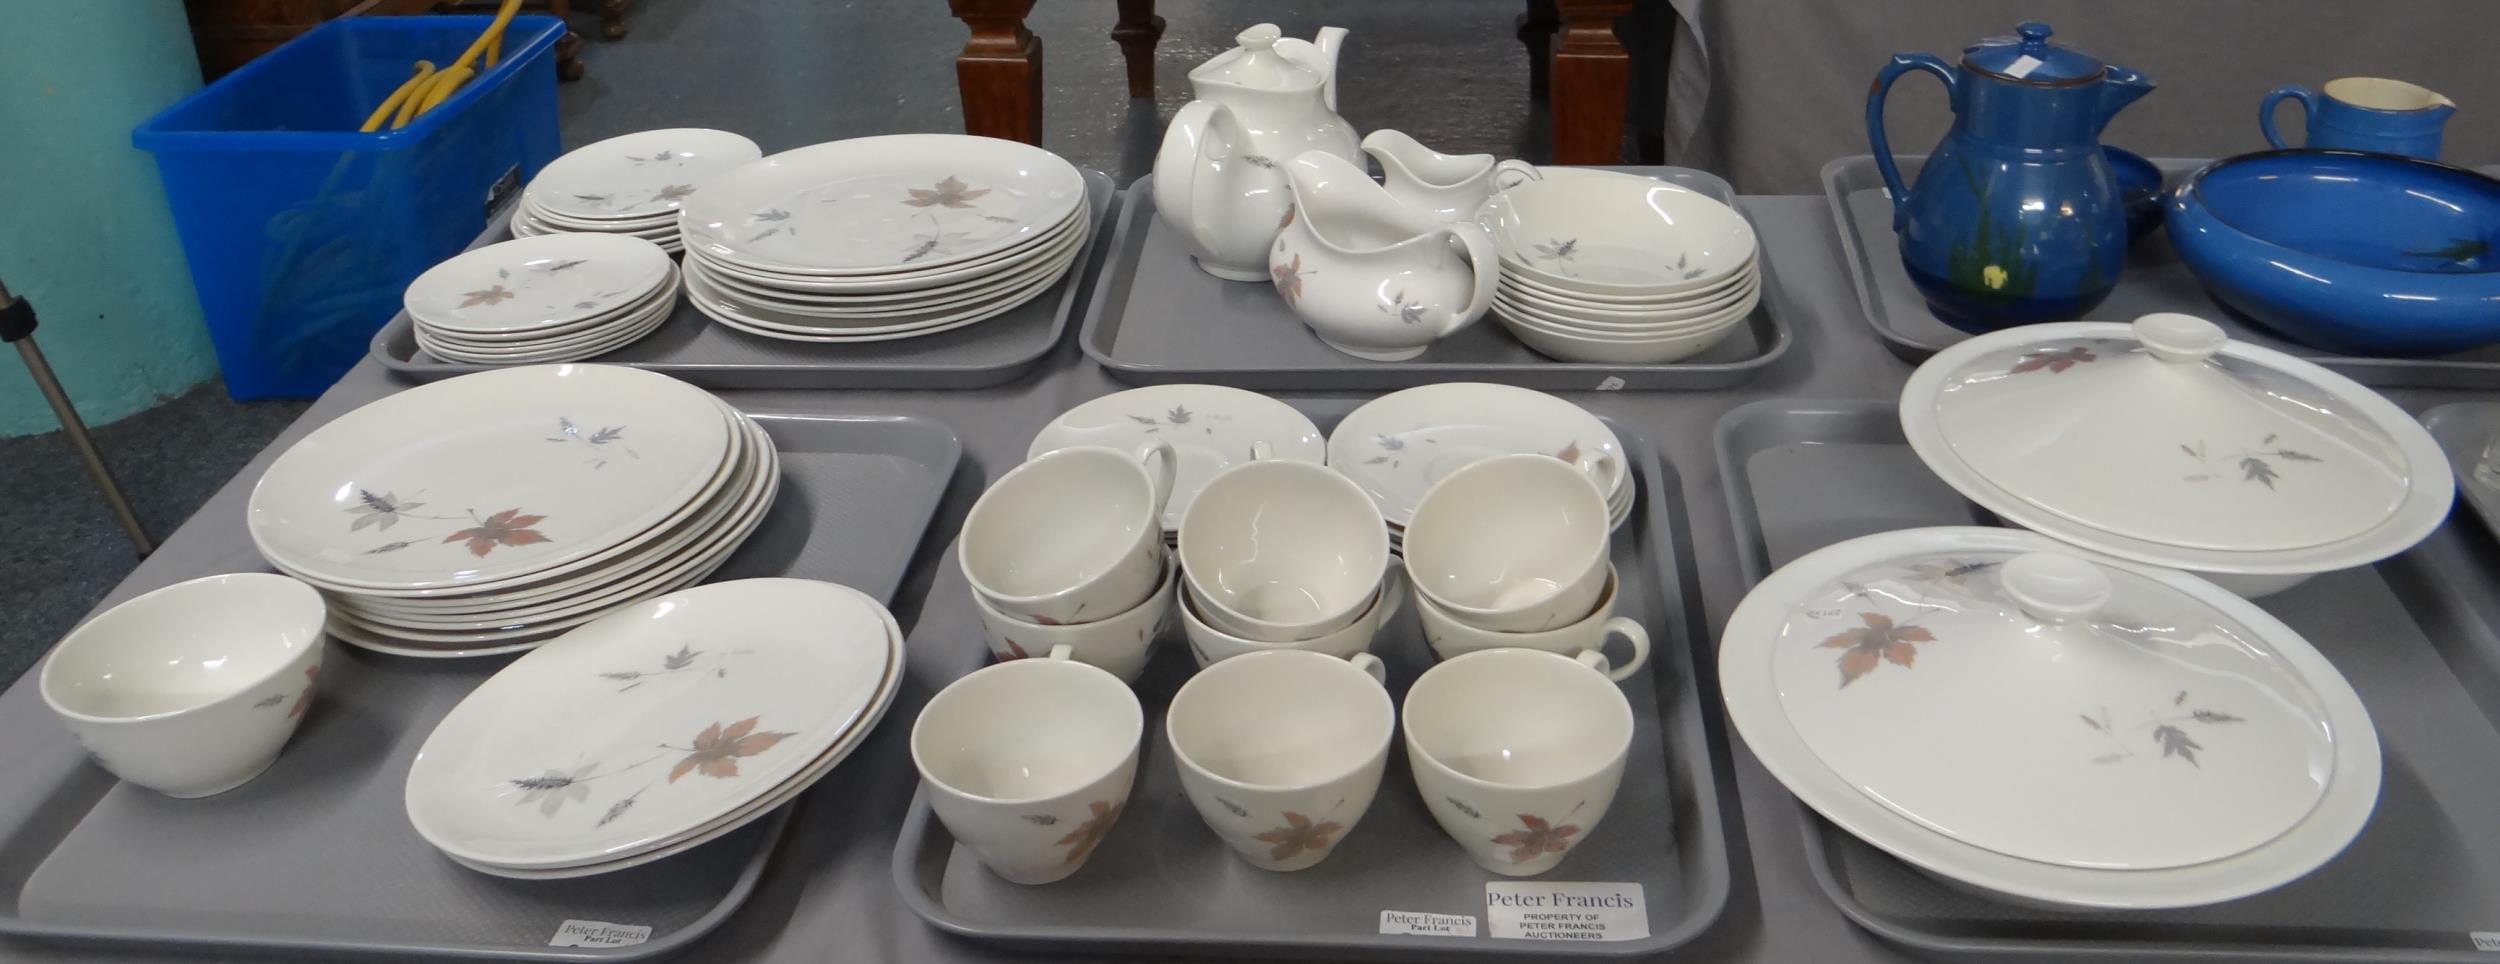 Five trays of Royal Doulton 'Tumbling Leaves' design items to include: lidded tureens, teacups and - Image 2 of 2